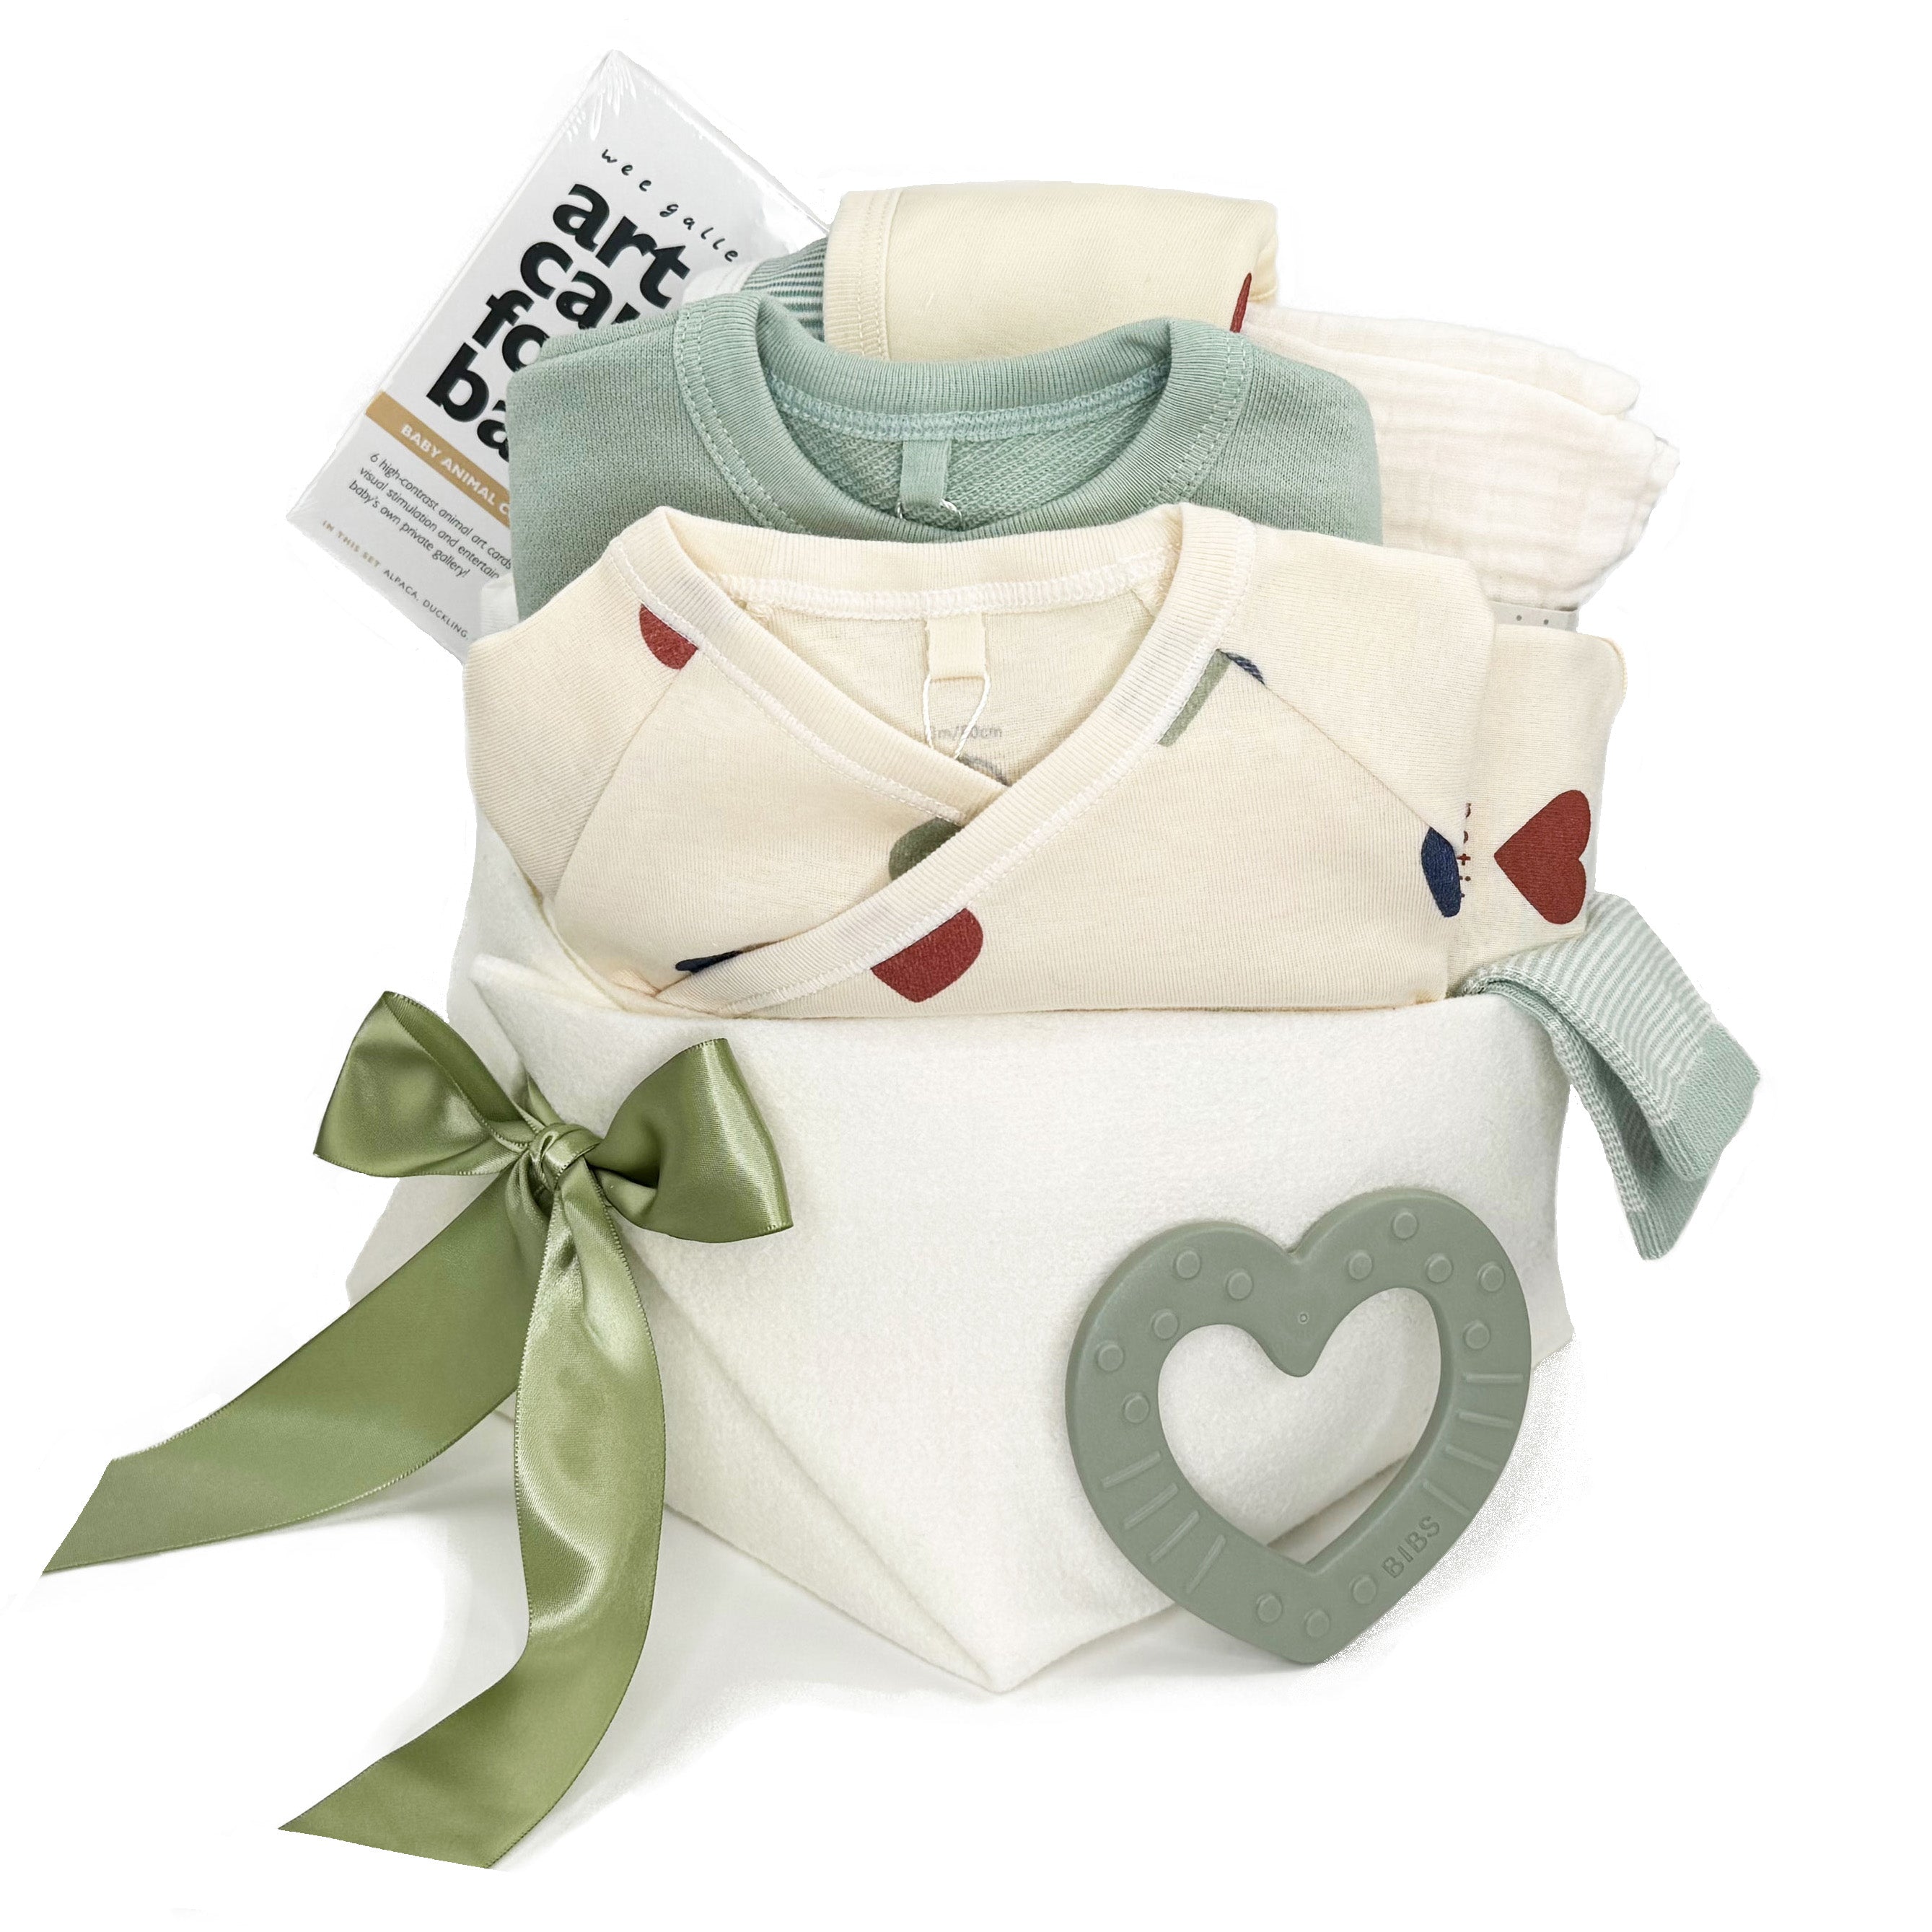 Luxury Neutral Baby Gift Basket featuring Petit Bateau at Bonjour Baby Baskets 